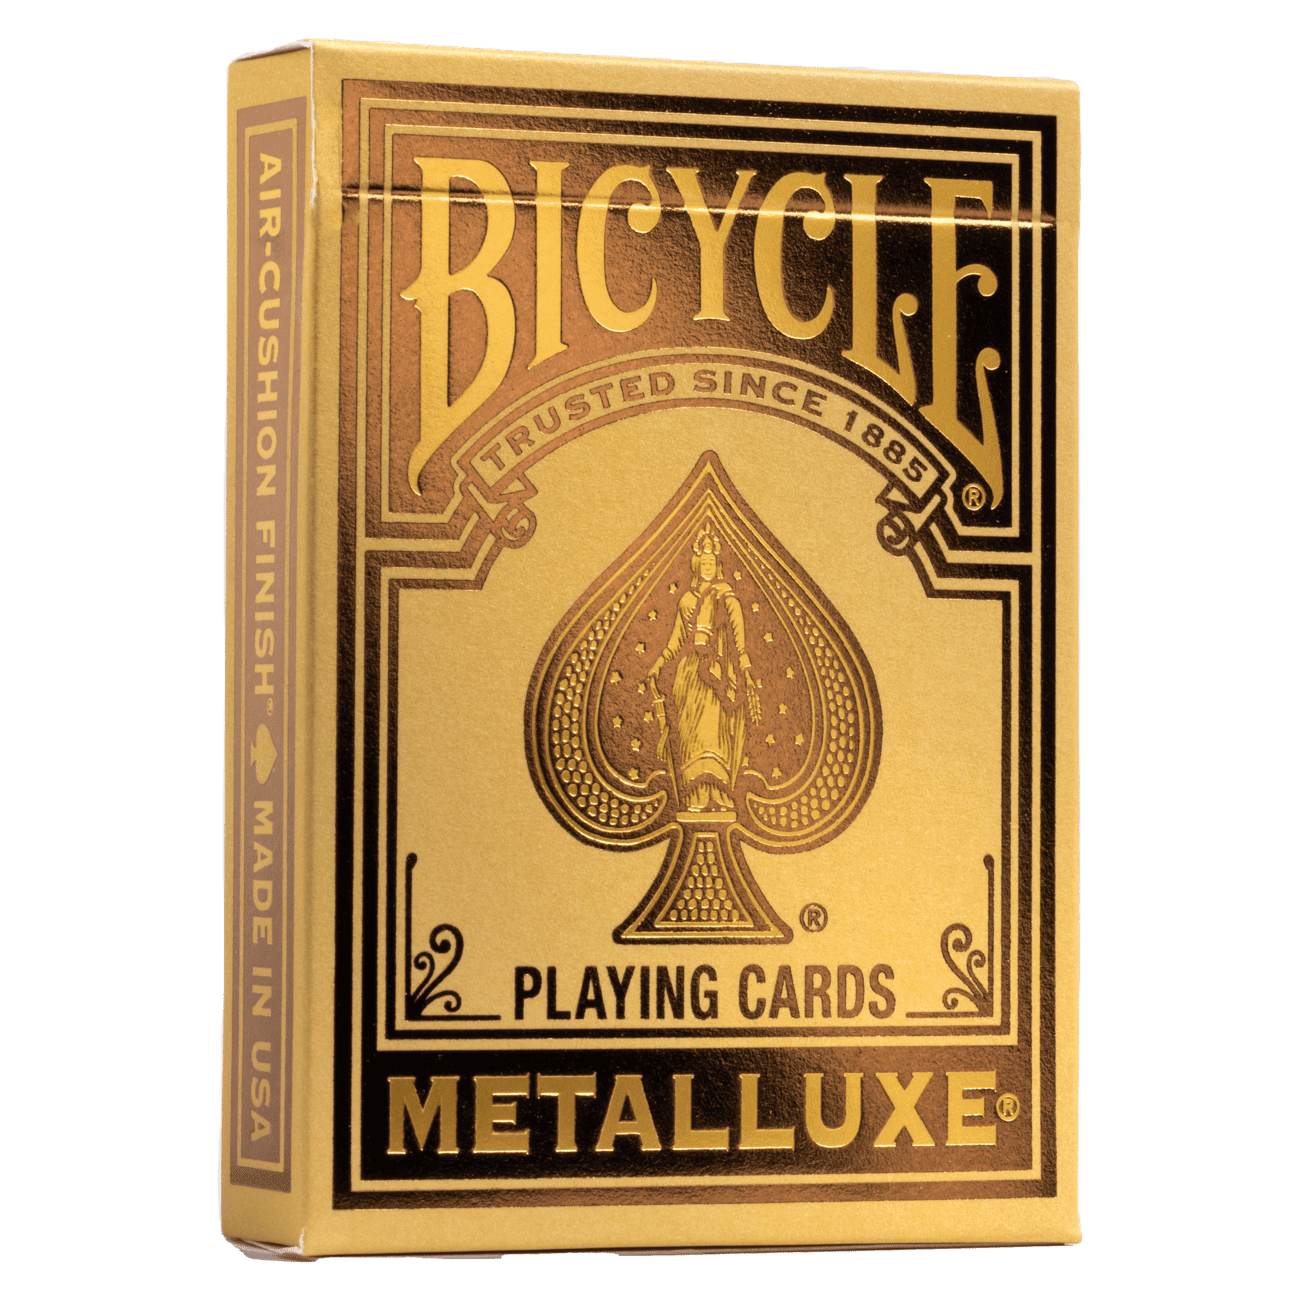 PlayingCardDecks.com-Bicycle Metalluxe Gold Playing Cards